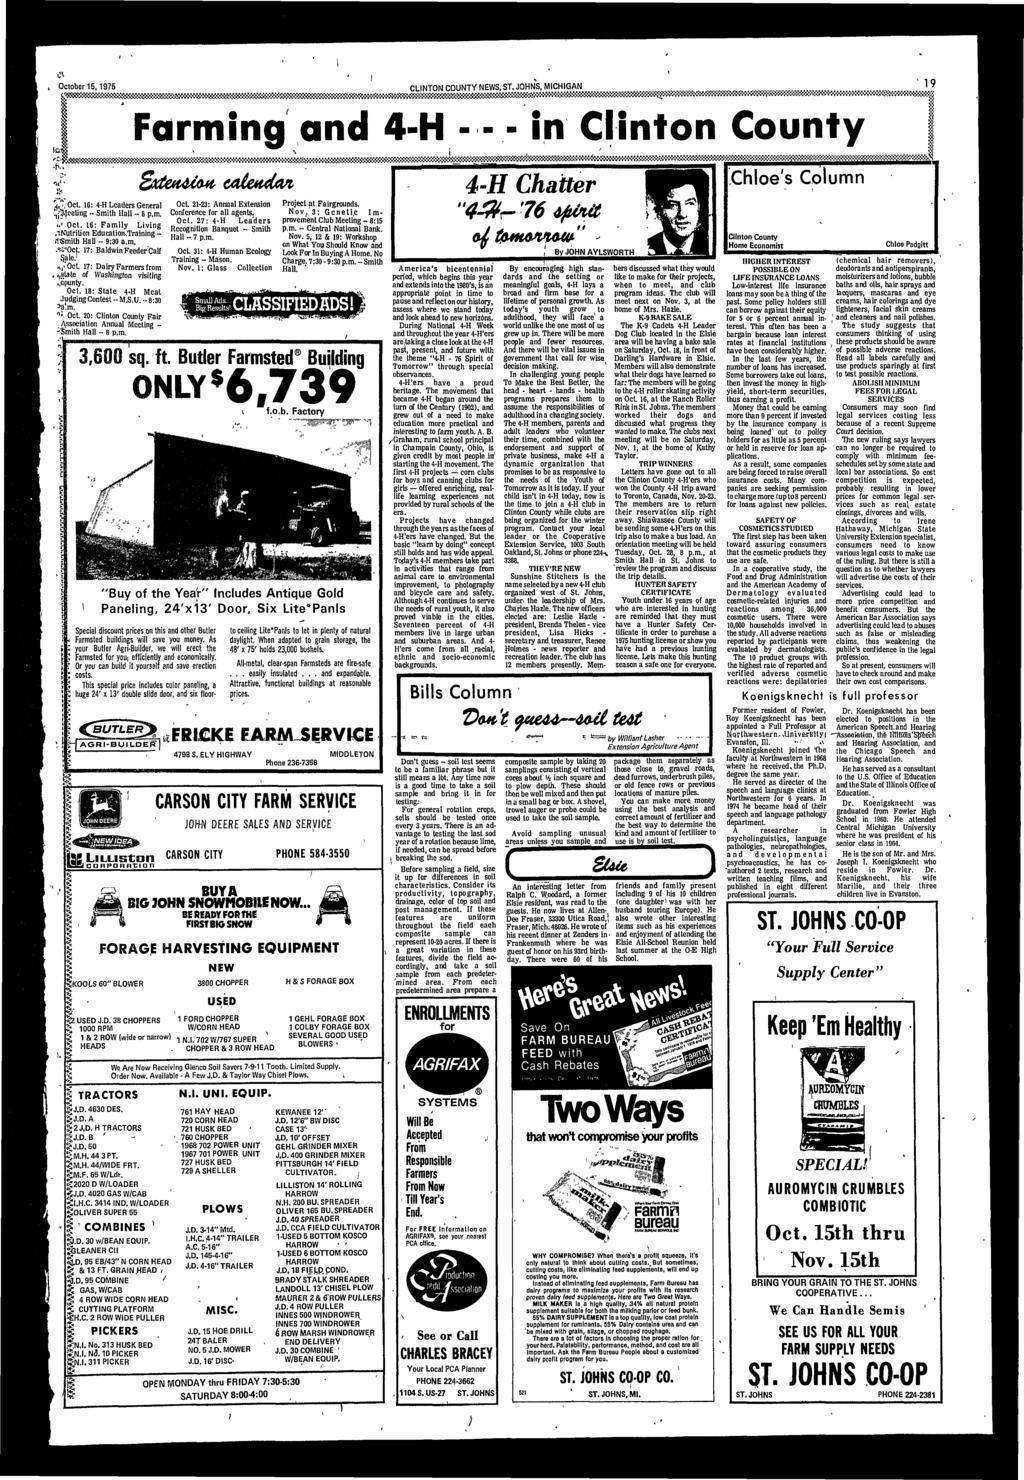 October 15,1975 CLINTON COUNTY NEWS,, MICHIGAN., 19 Farmng and 4-H - - - n Clnton County \l\ Oct, 16: 4-H Leaders General Reelng - Smth Hall - 8 p.m. t. Oct. 16: Famly Lvng.